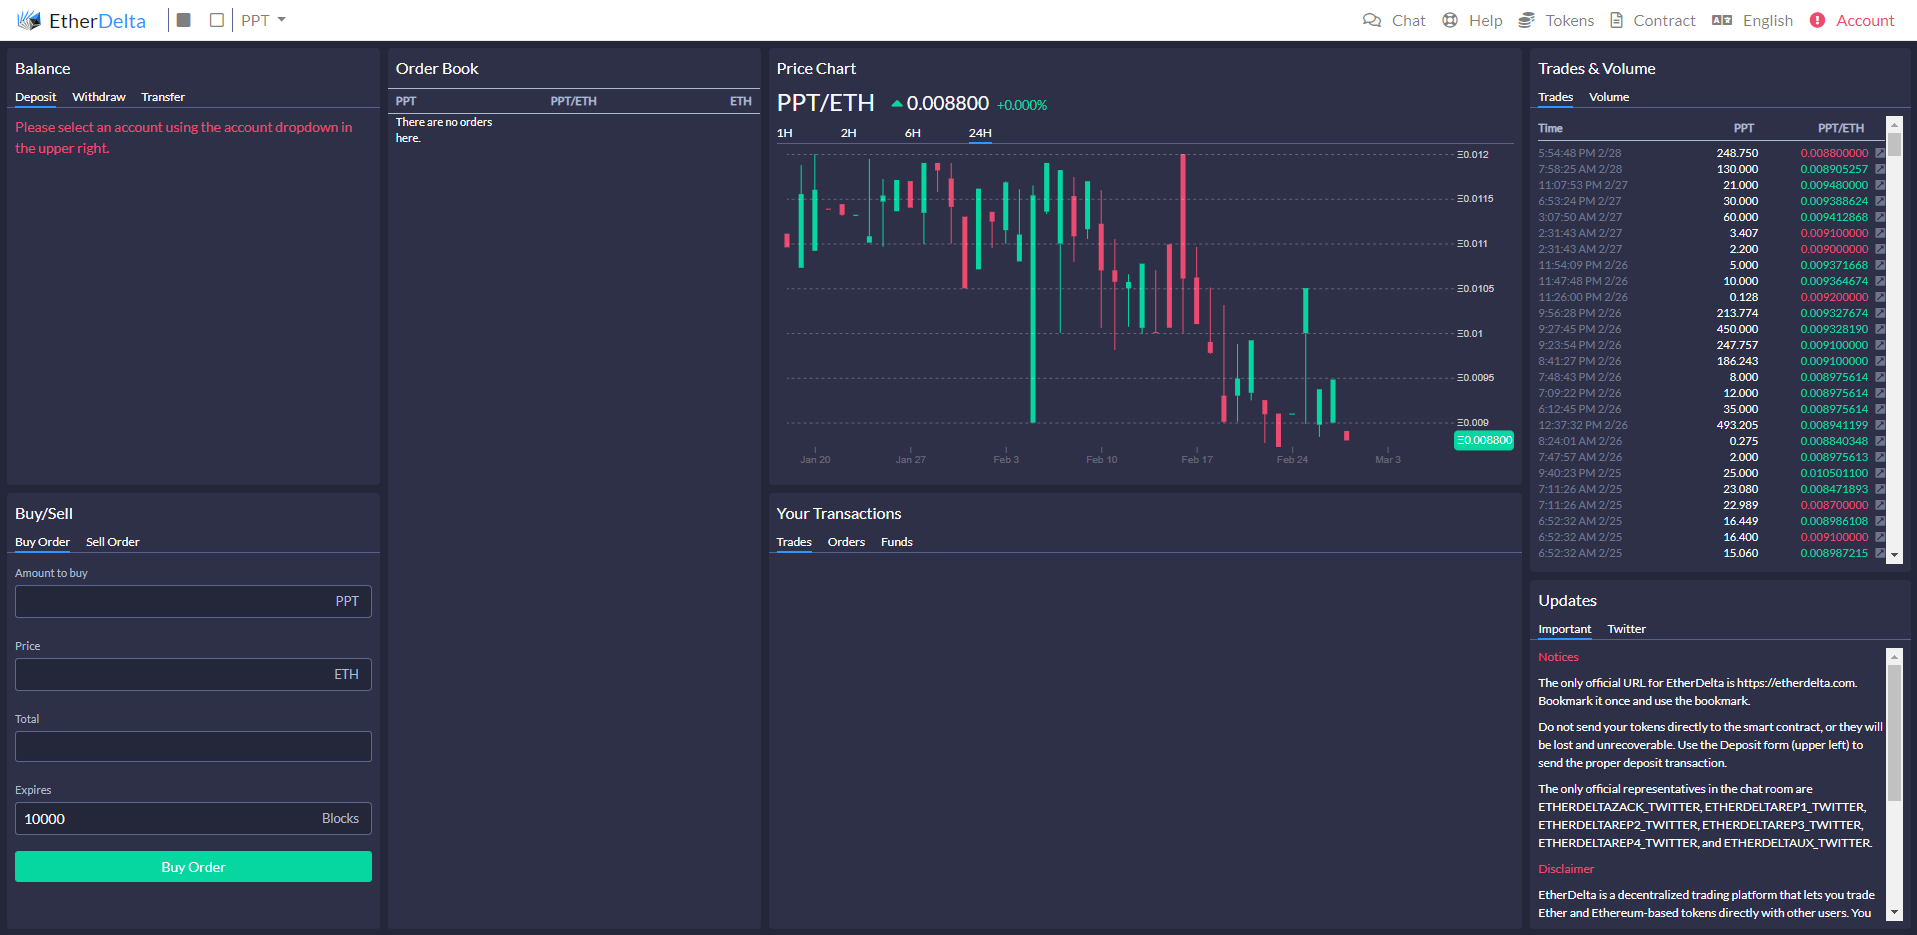 Accessing Feeds from EtherDelta on Trades, Funds, - Cloudera Community - 